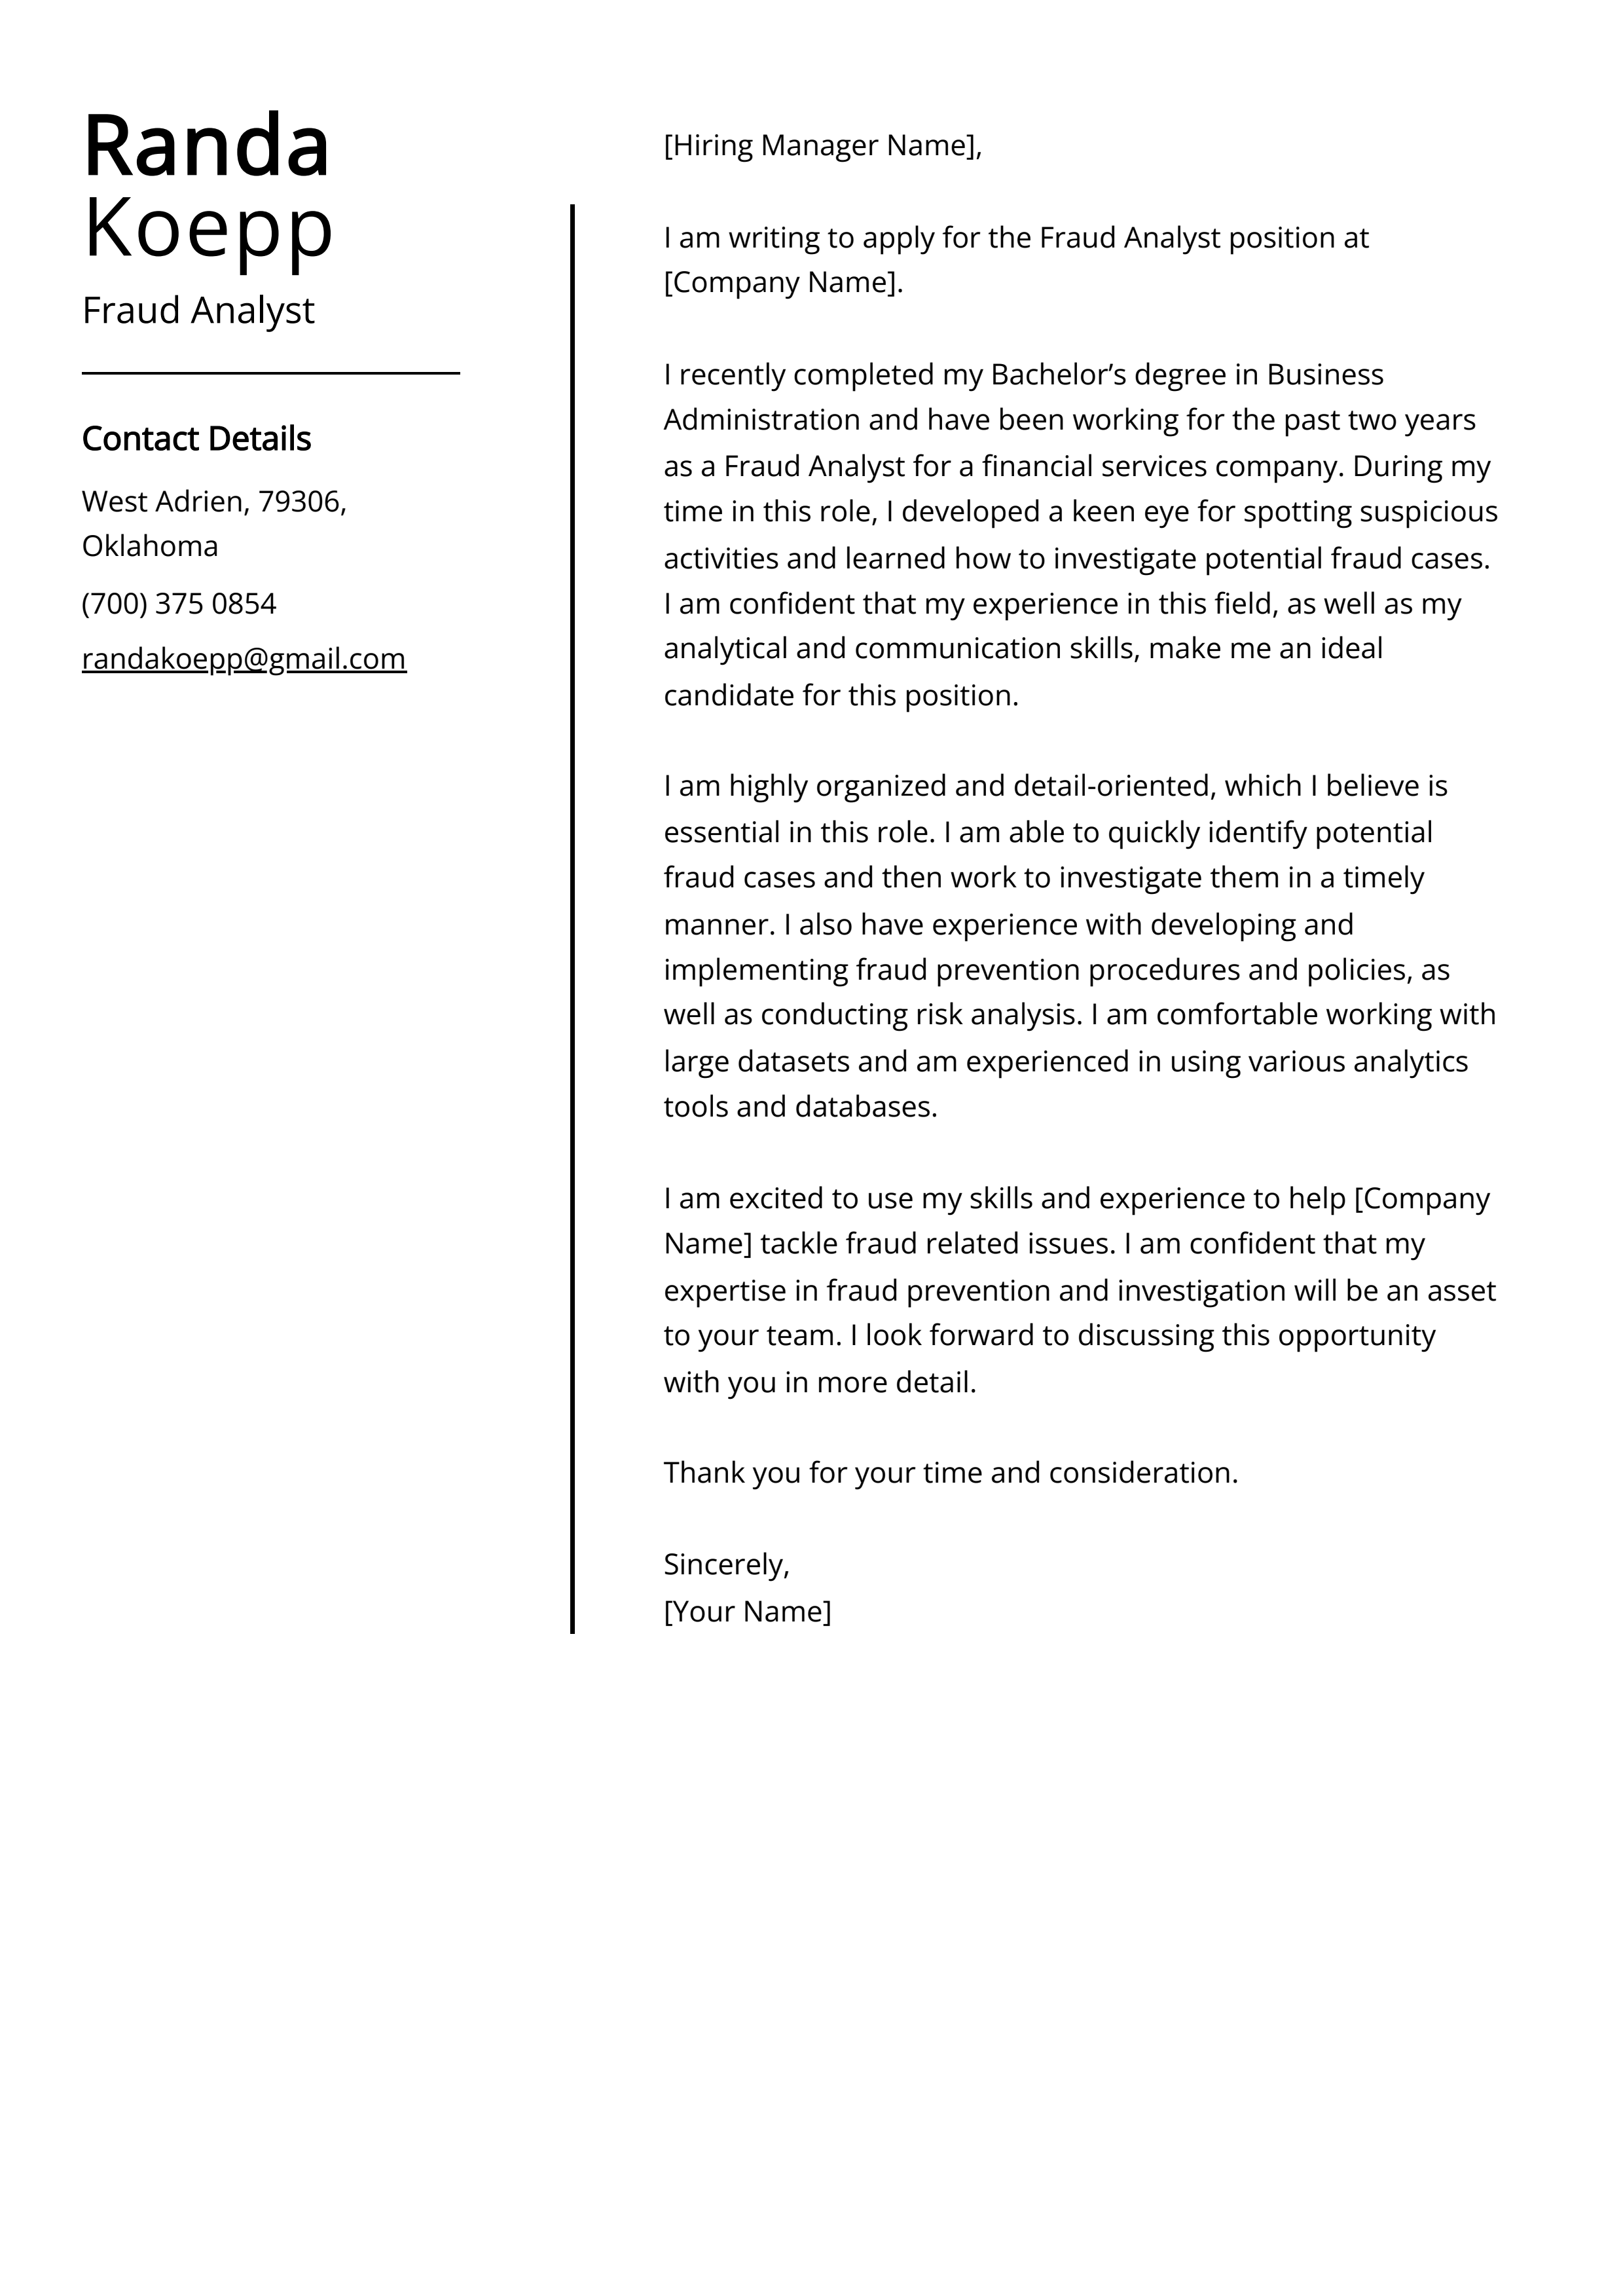 Fraud Analyst Cover Letter Example